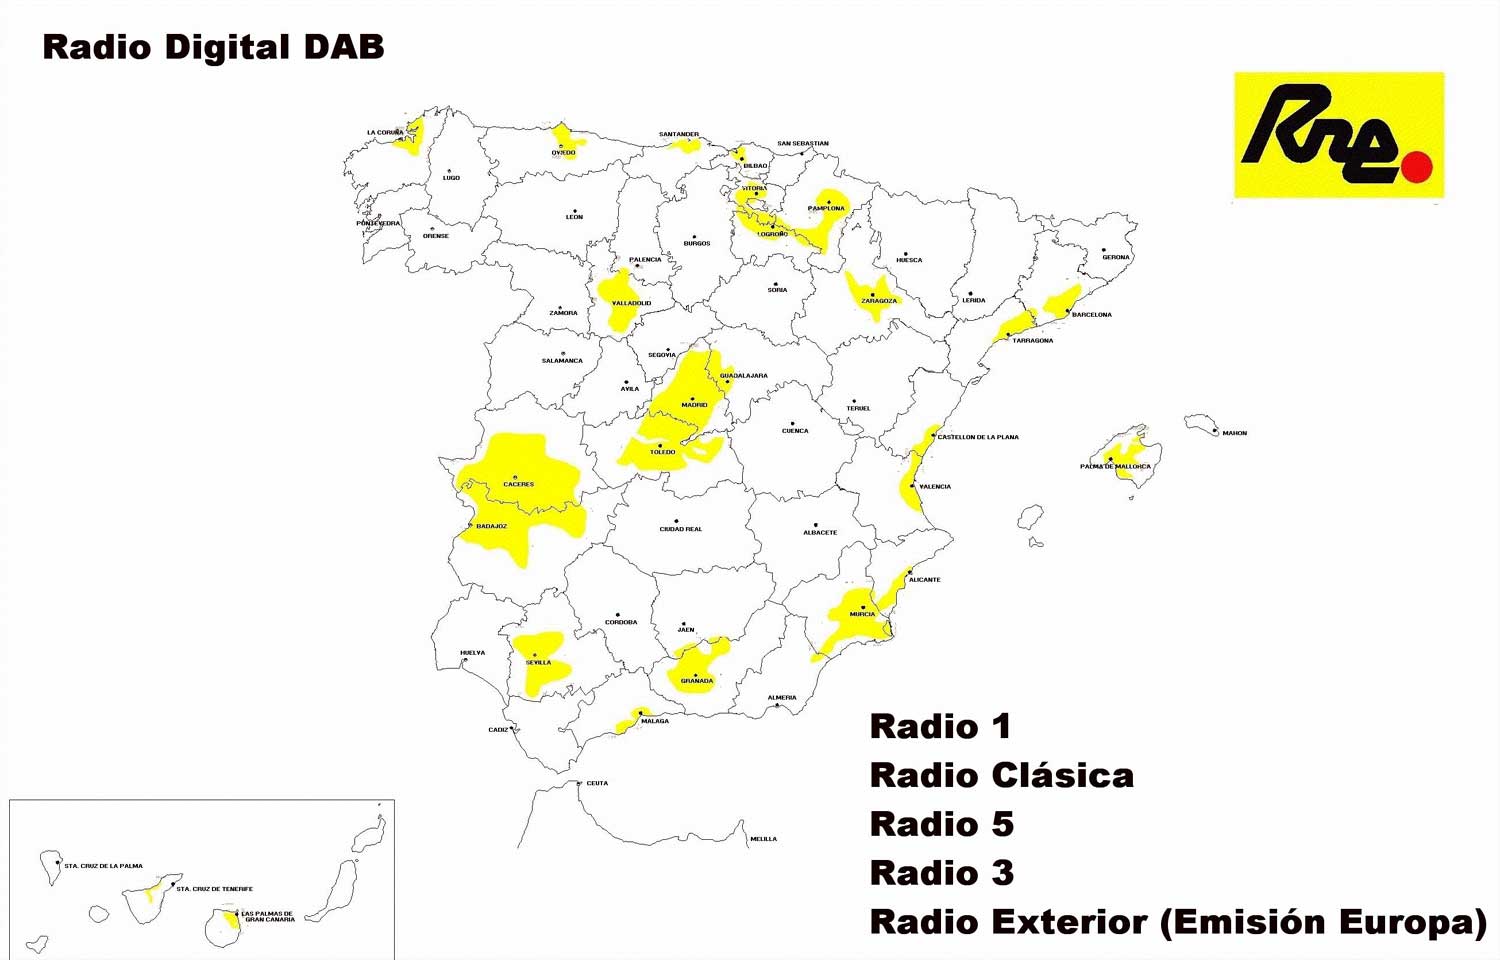 DAB coverage map for Spain (showing only coverage for public radio RNE)